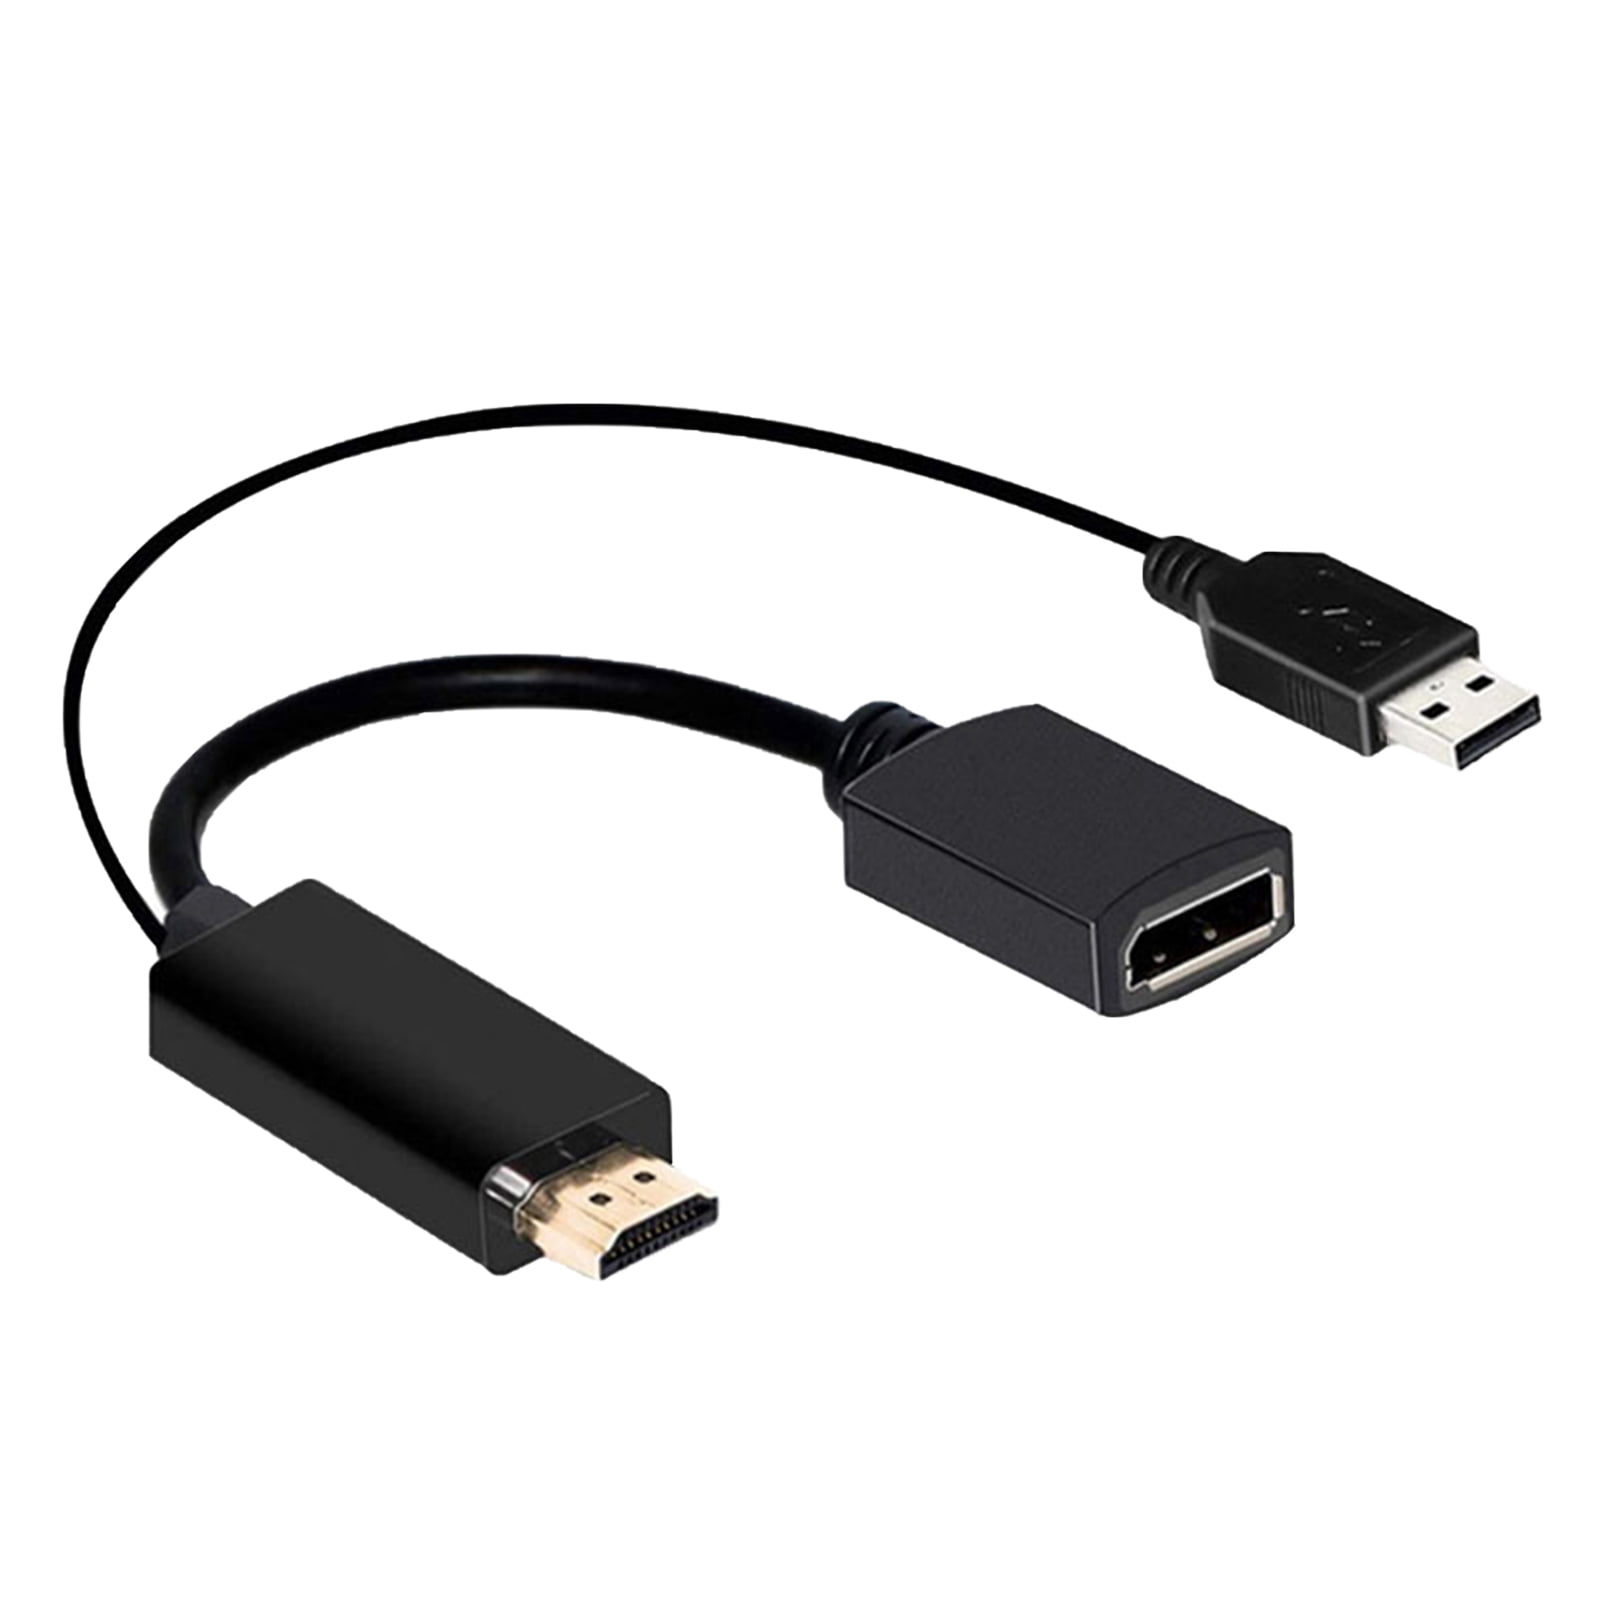 Microsoft W7S-00001 VGA Video Cable Adapter For Surface RT and Surface 2 Tablet 